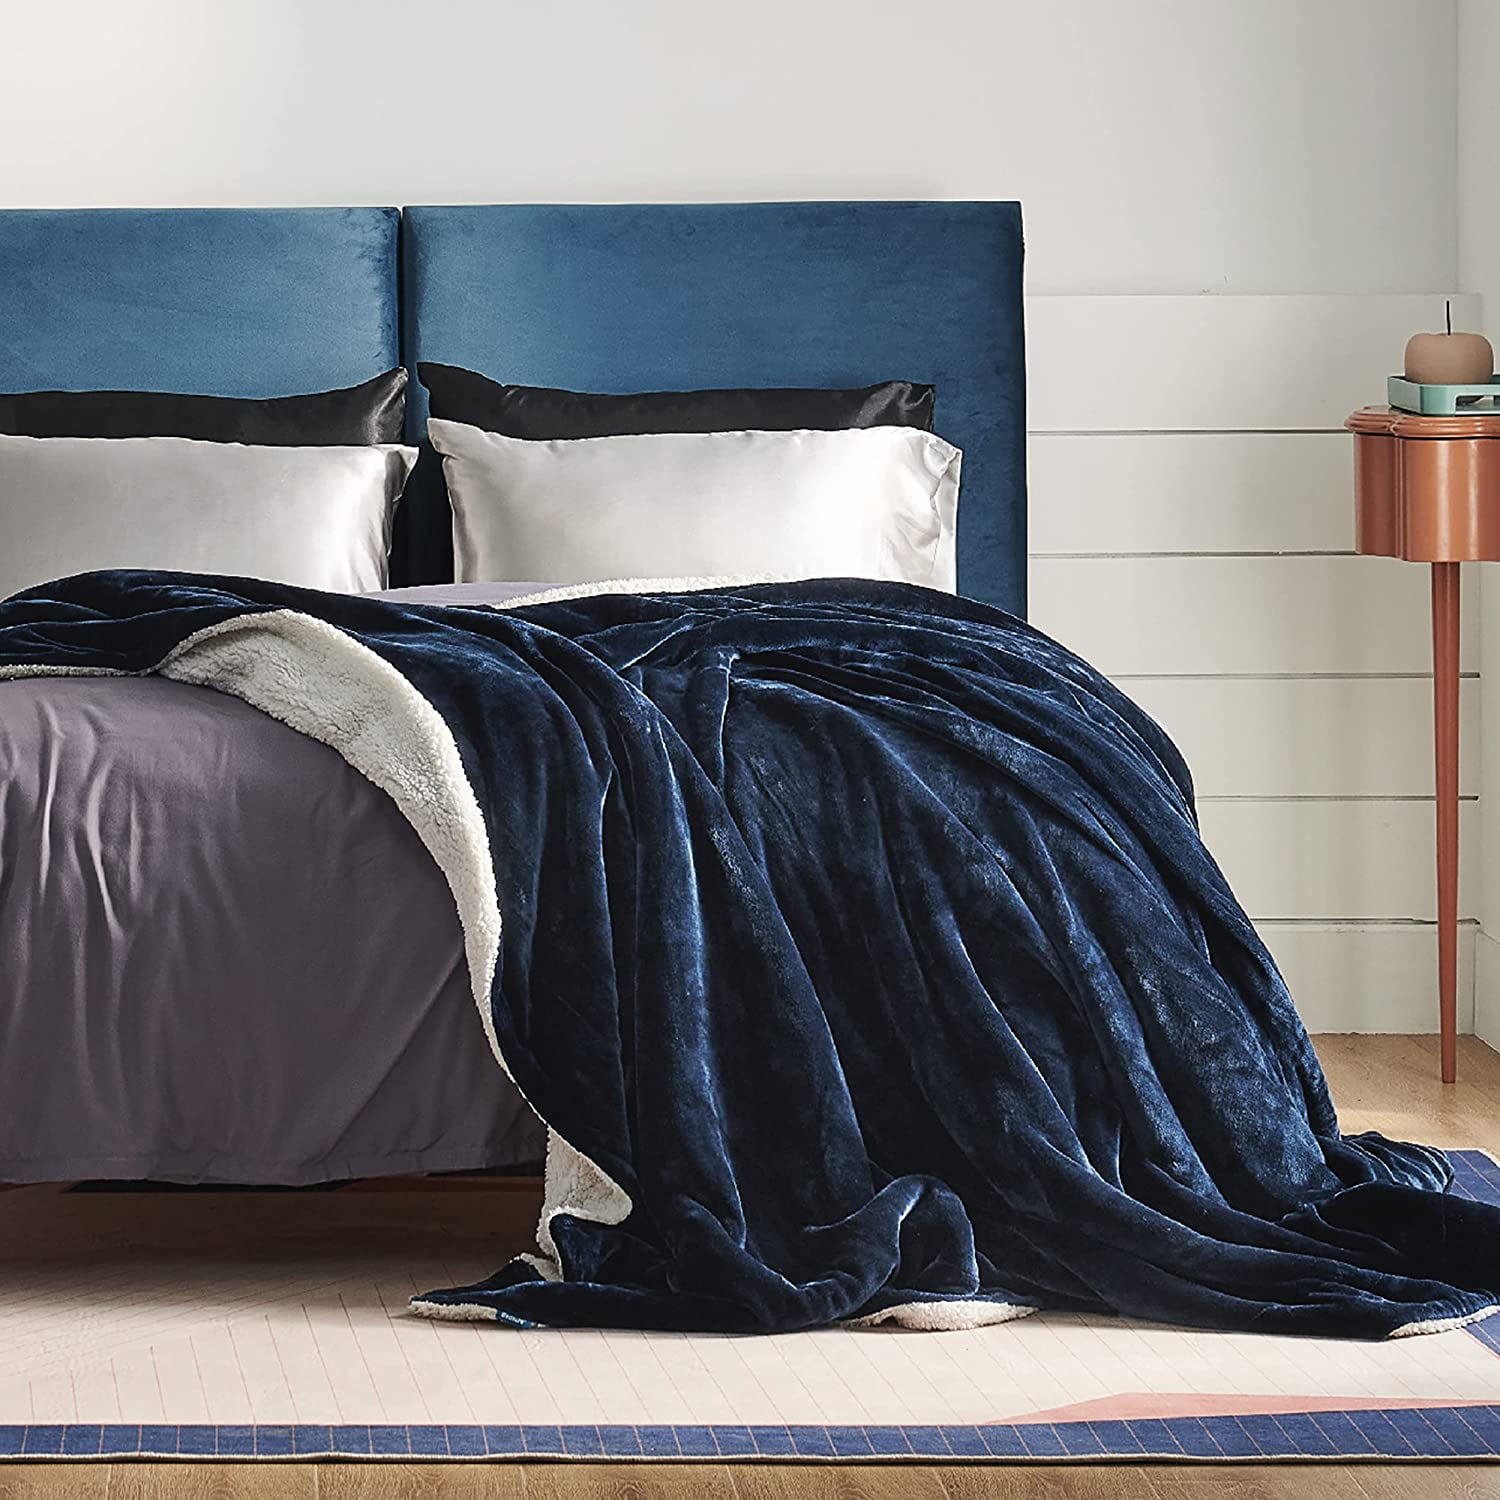 Bedsure Sherpa Fleece Queen Size Blankets Navy - Thick and